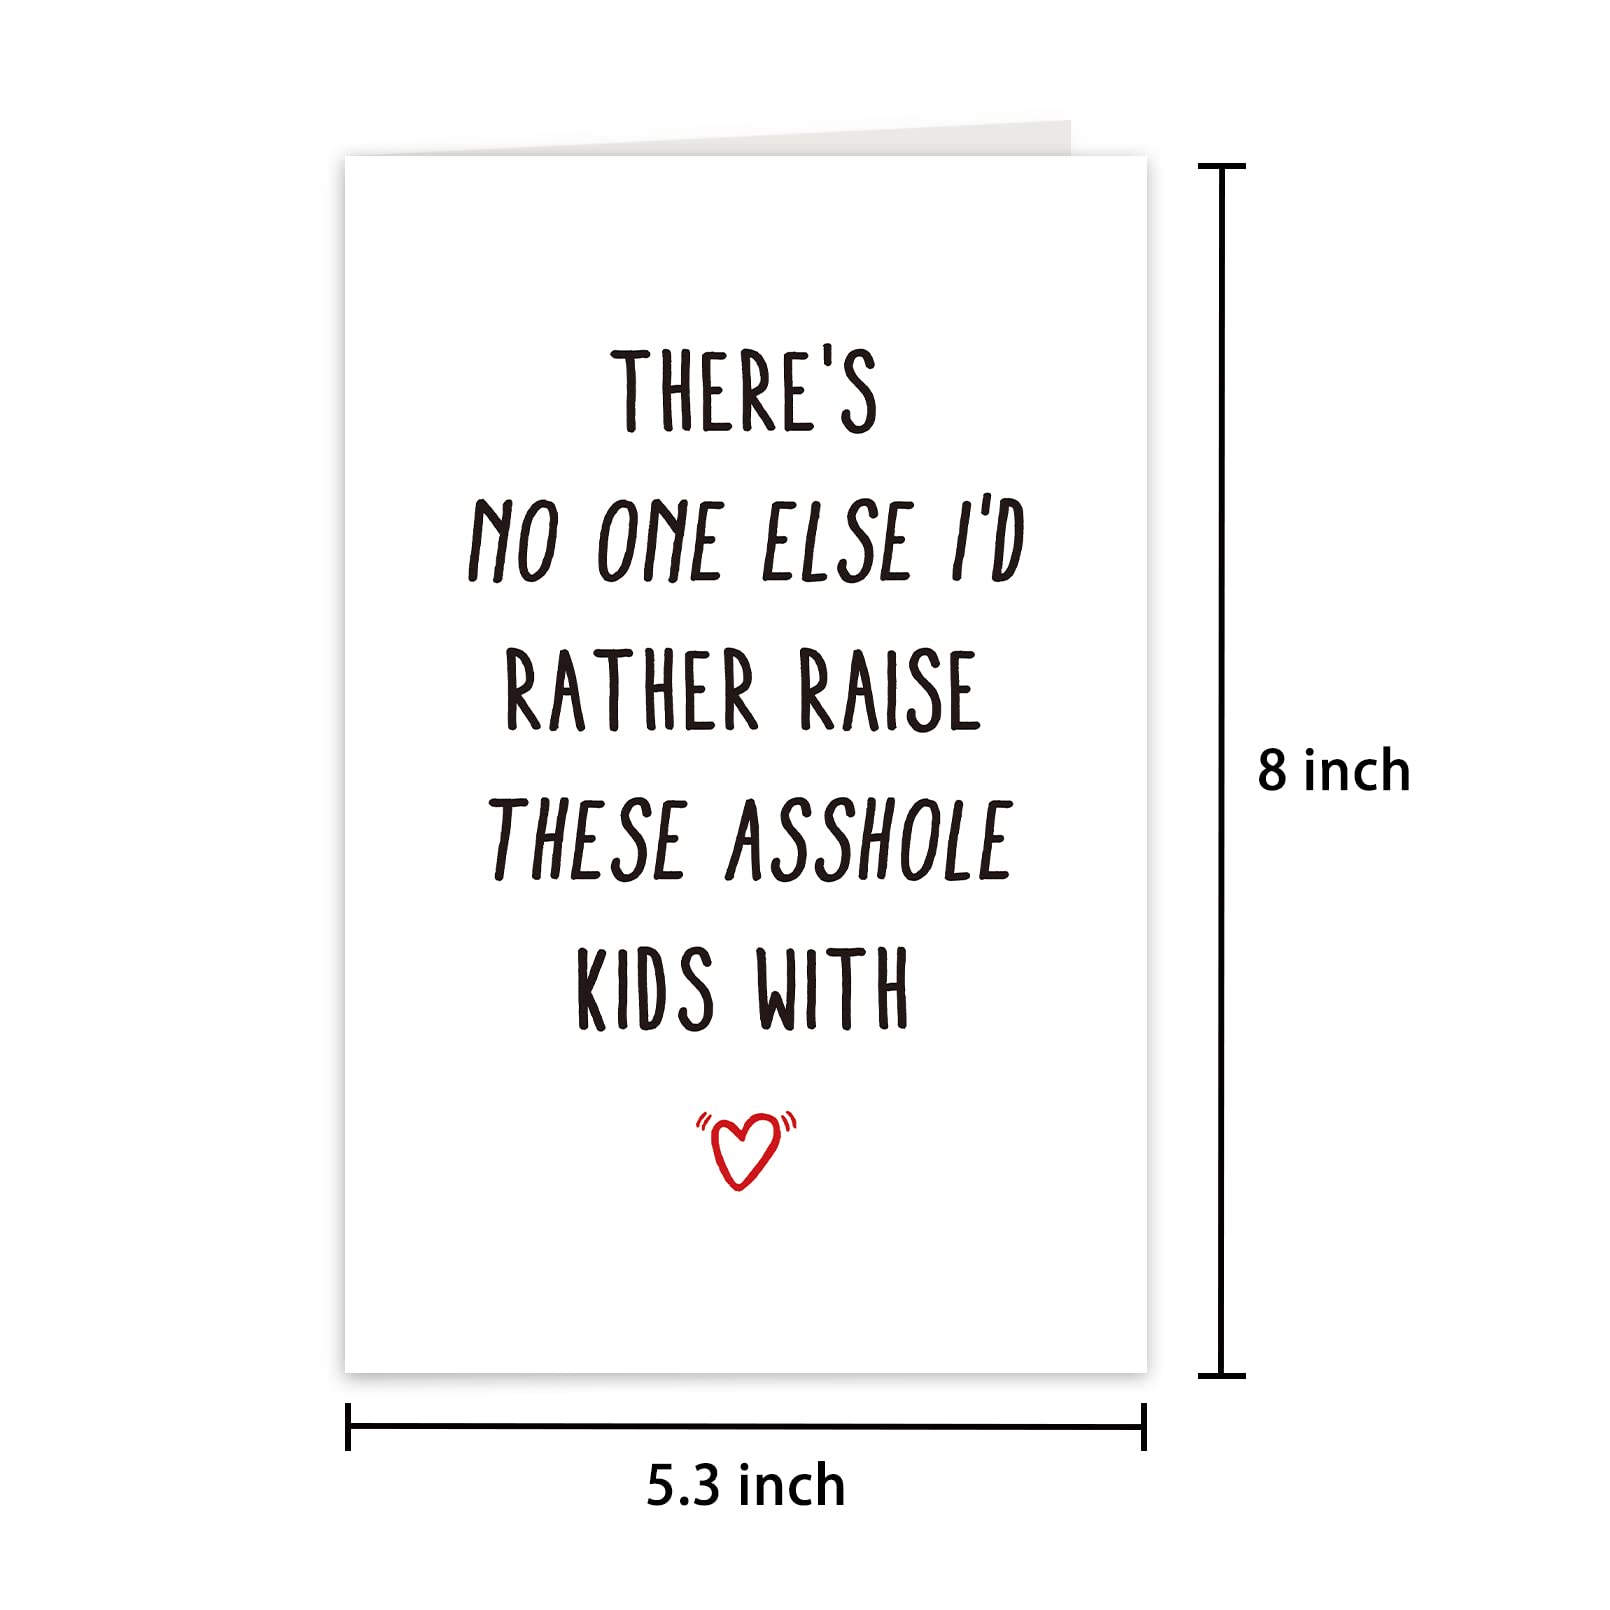 Ulbeelol Funny Fathers Day Card from Wife, Humorous Card for Husband, Hilarious Anniversary Card for Husband Him